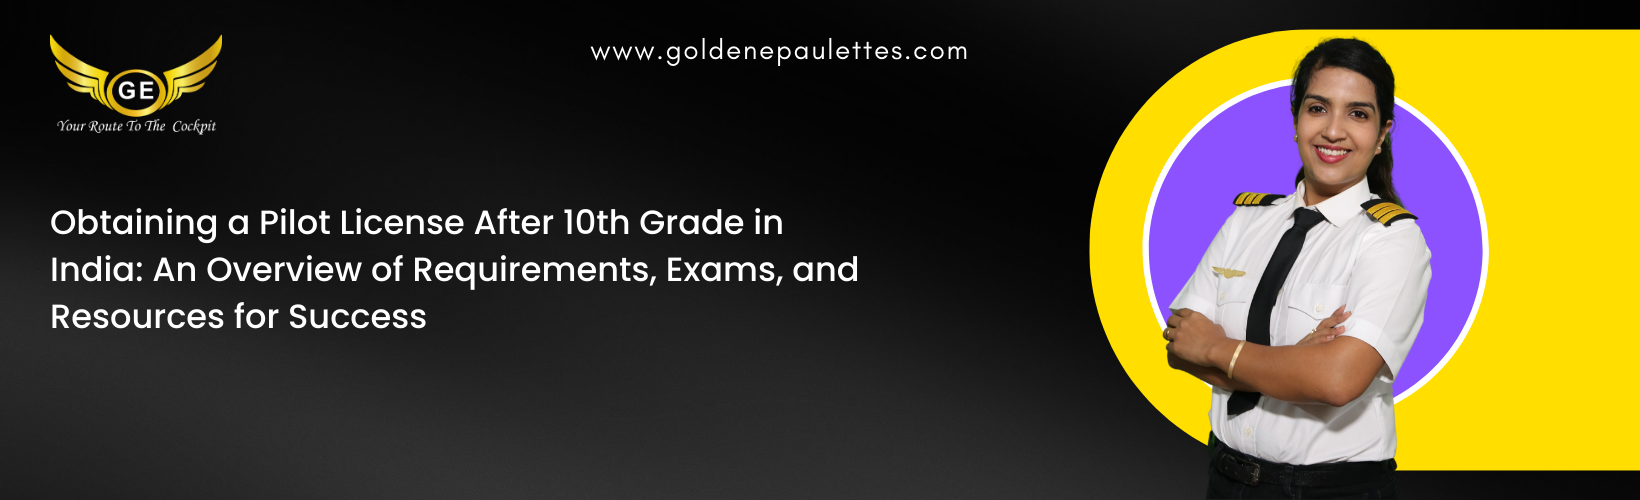 The Requirements for Obtaining a Pilot License After 10th Grade in India